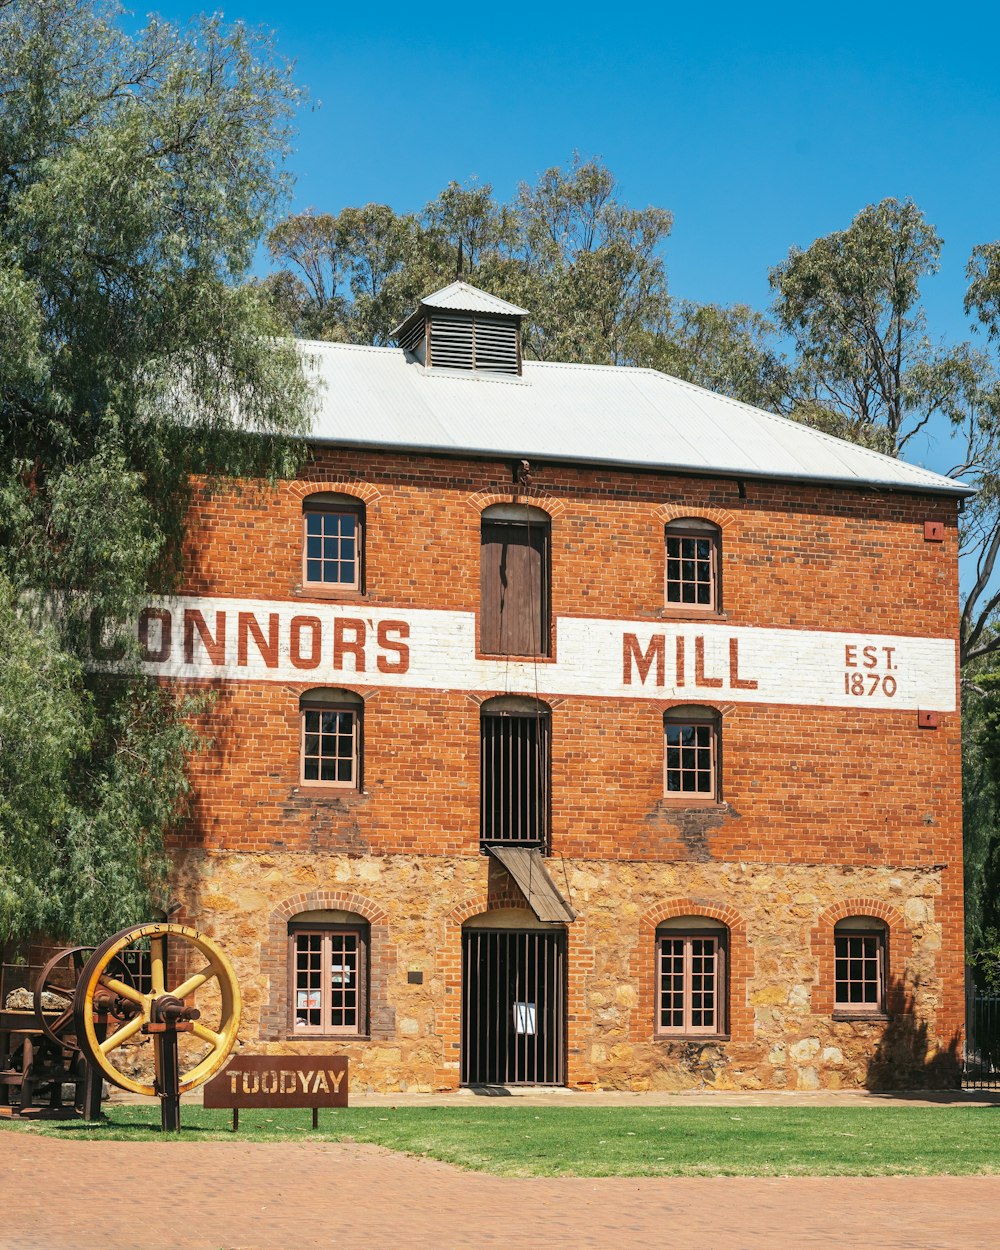 a brick building with a sign that says connors mill